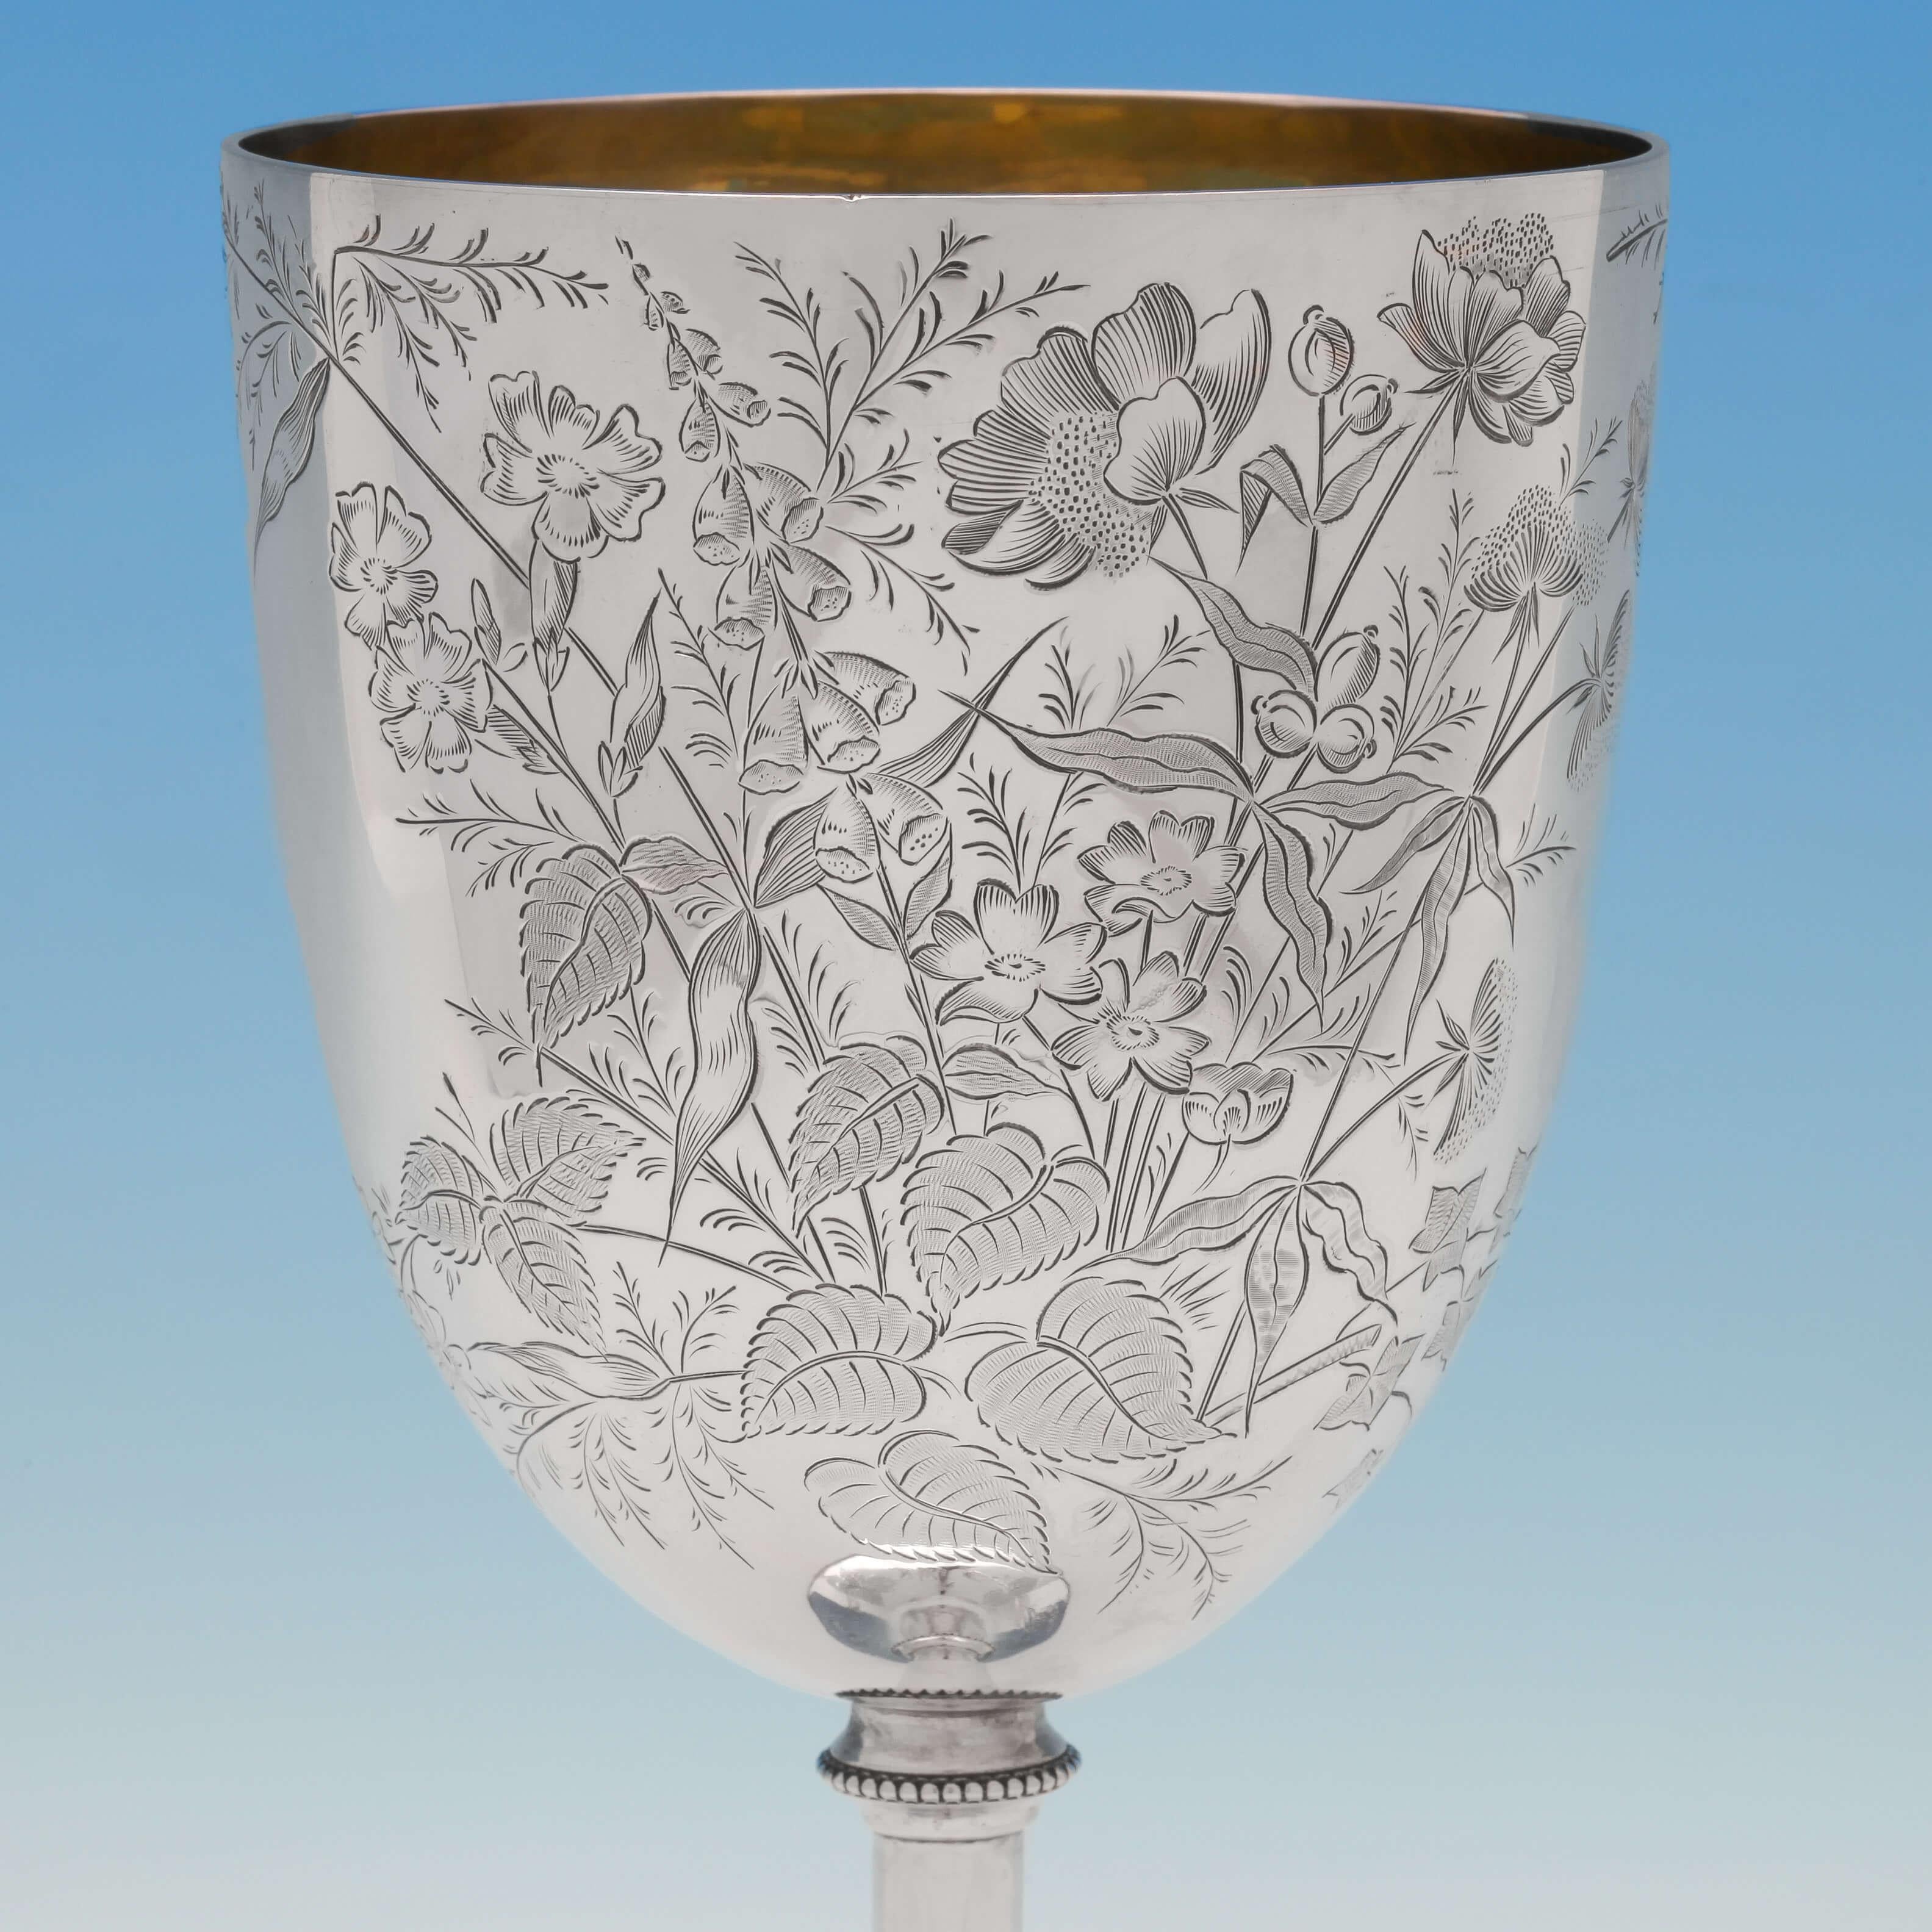 Hallmarked in Sheffield in 1887 by W. W. Harrison, this attractive, large, Victorian, antique, sterling silver goblet, features naturalistic engraving throughout, a bead border, and a gilt interior. The goblet measures 9